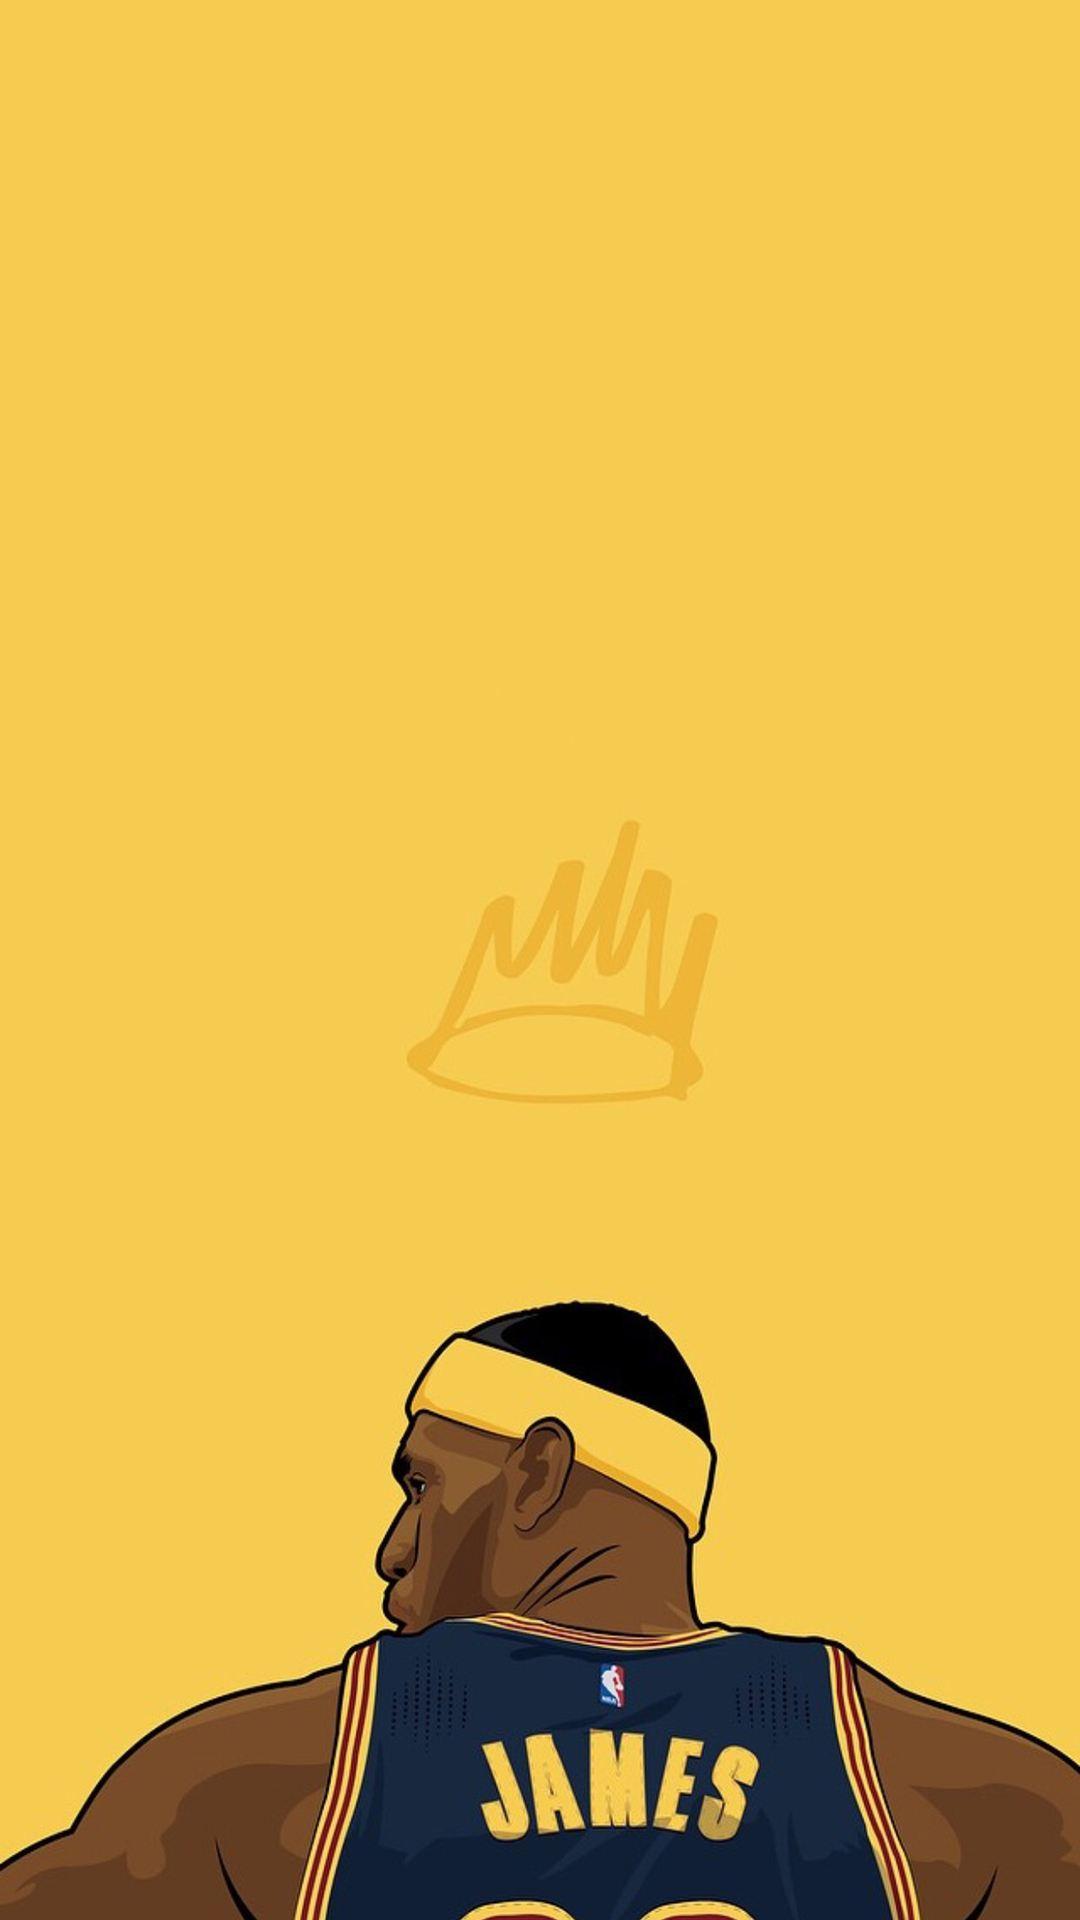 IPhone wallpaper of Lebron James from the back - NBA